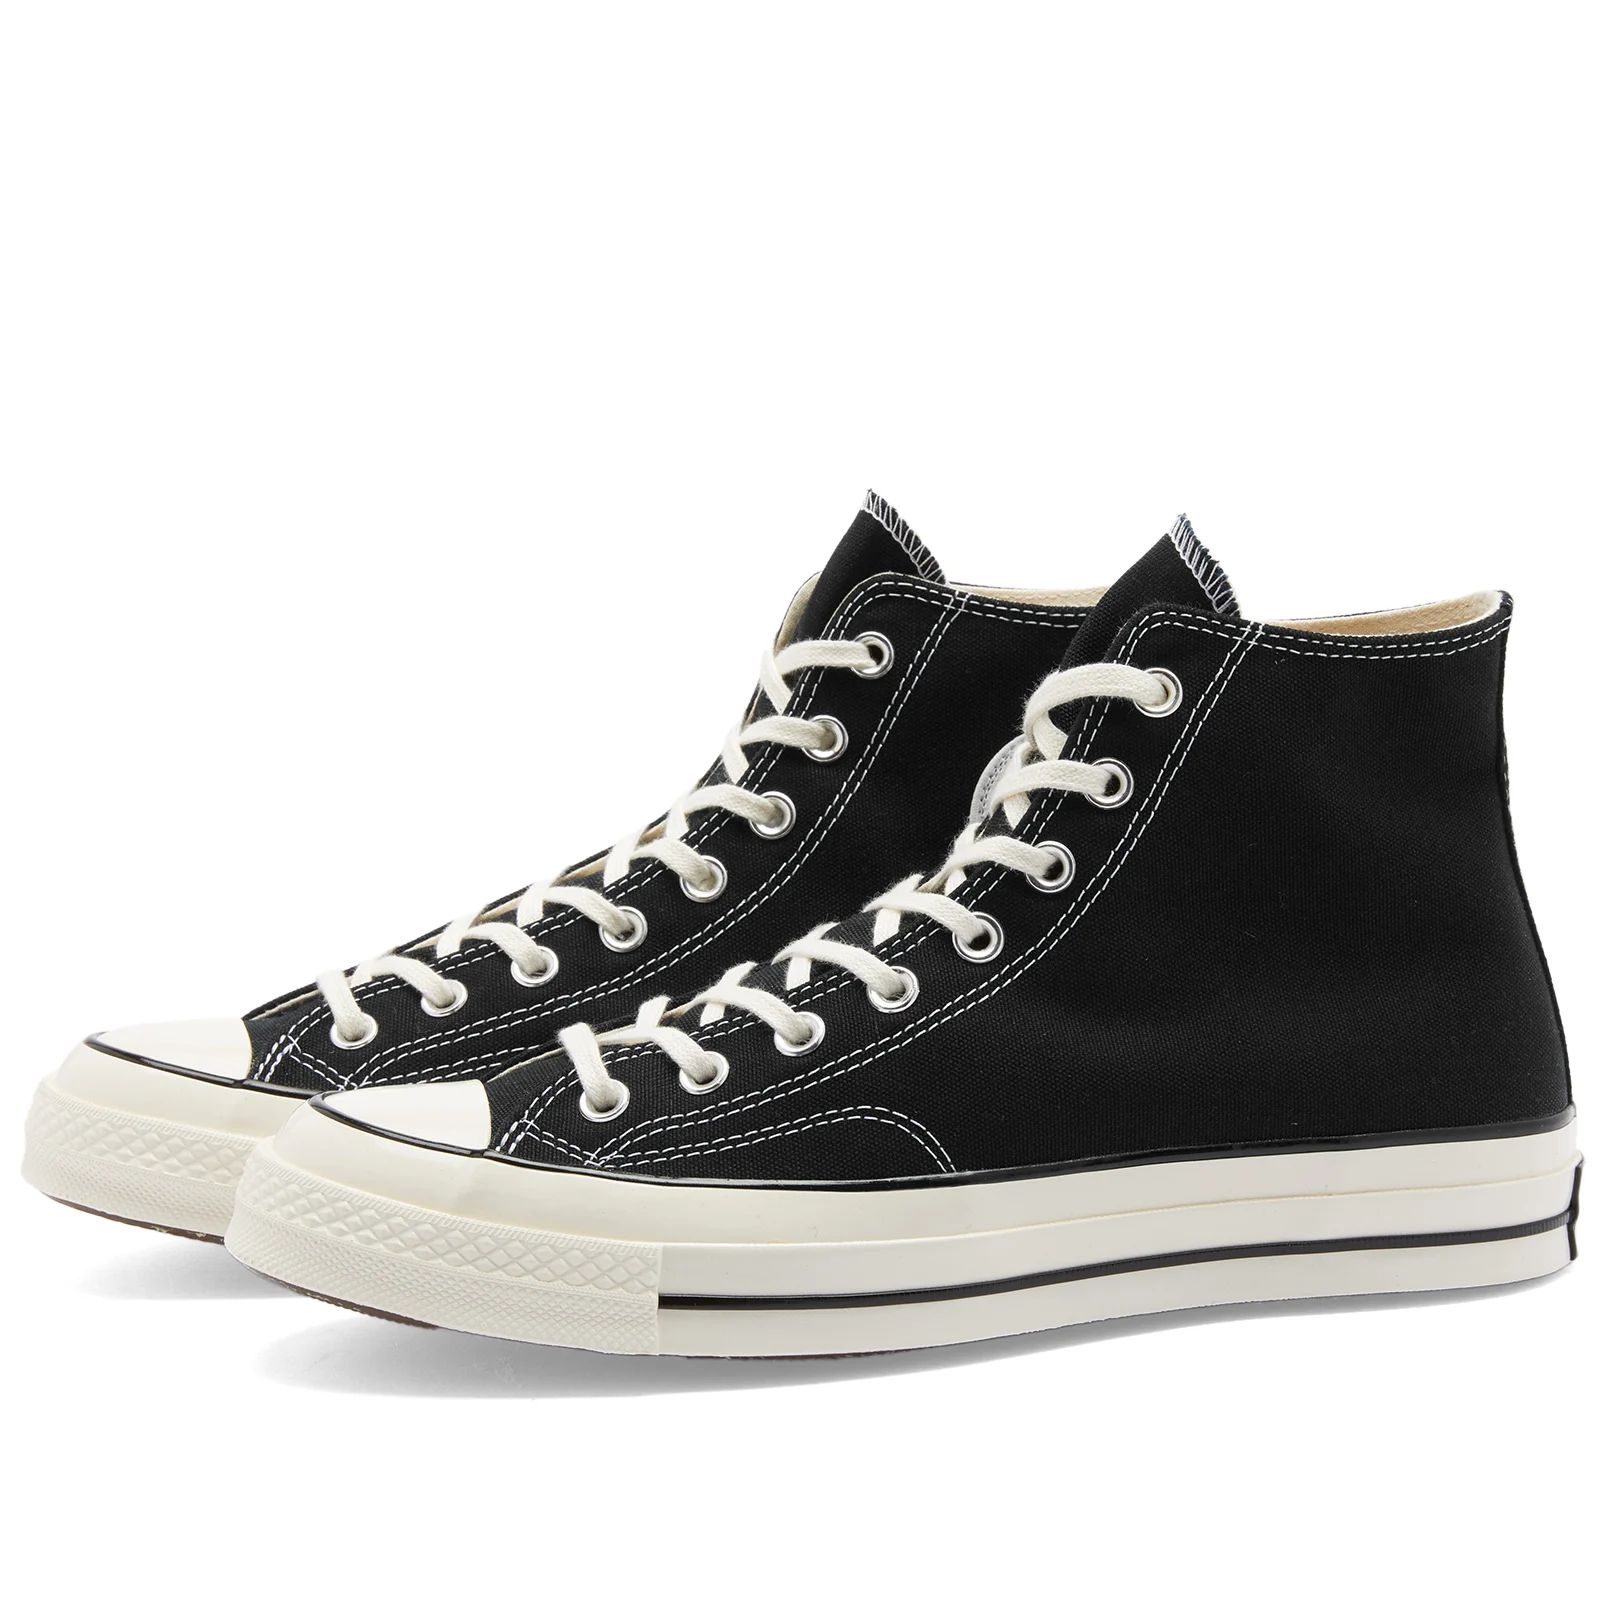 Converse Chuck Taylor 1970s Hi | End Clothing (UK & IE)